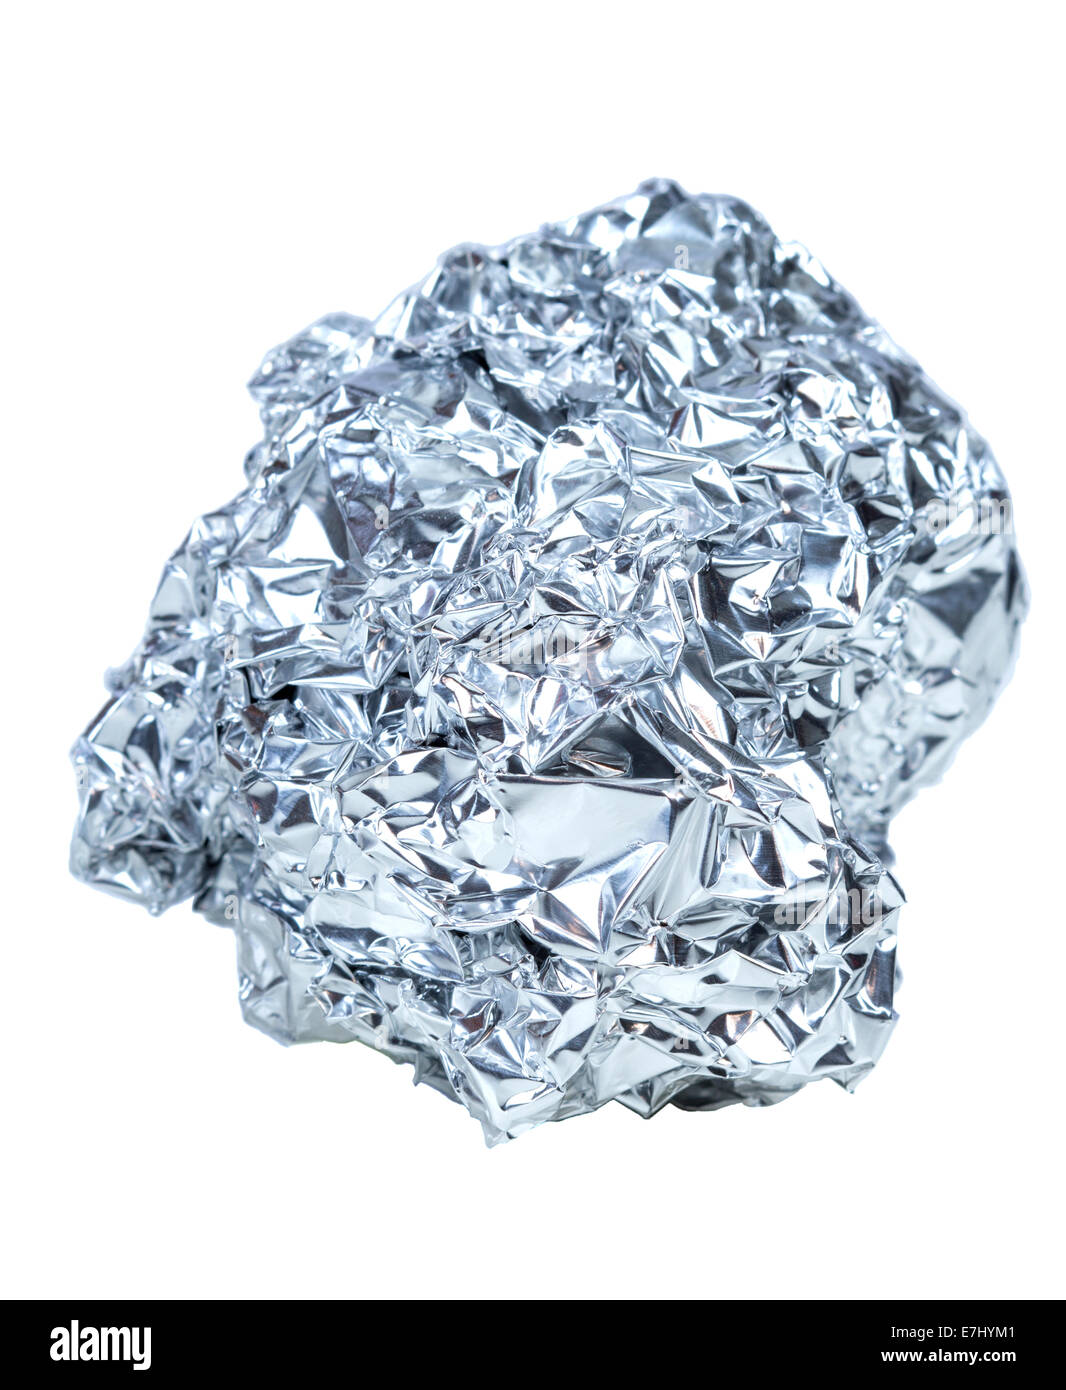 crumpled ball of aluminum foil isolated on white background Stock Photo